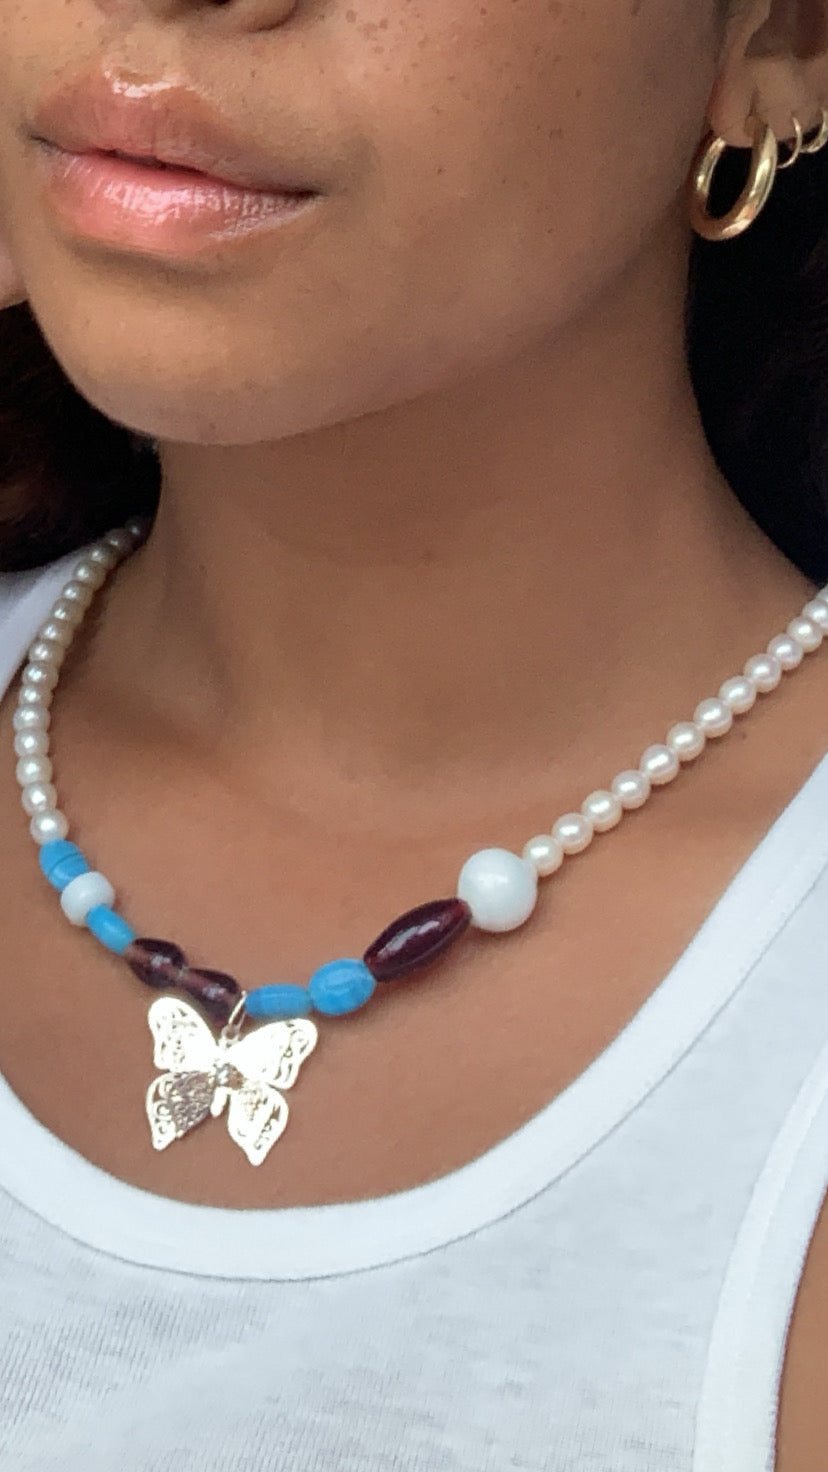 "Tel un Papillon" Upcycled Necklace